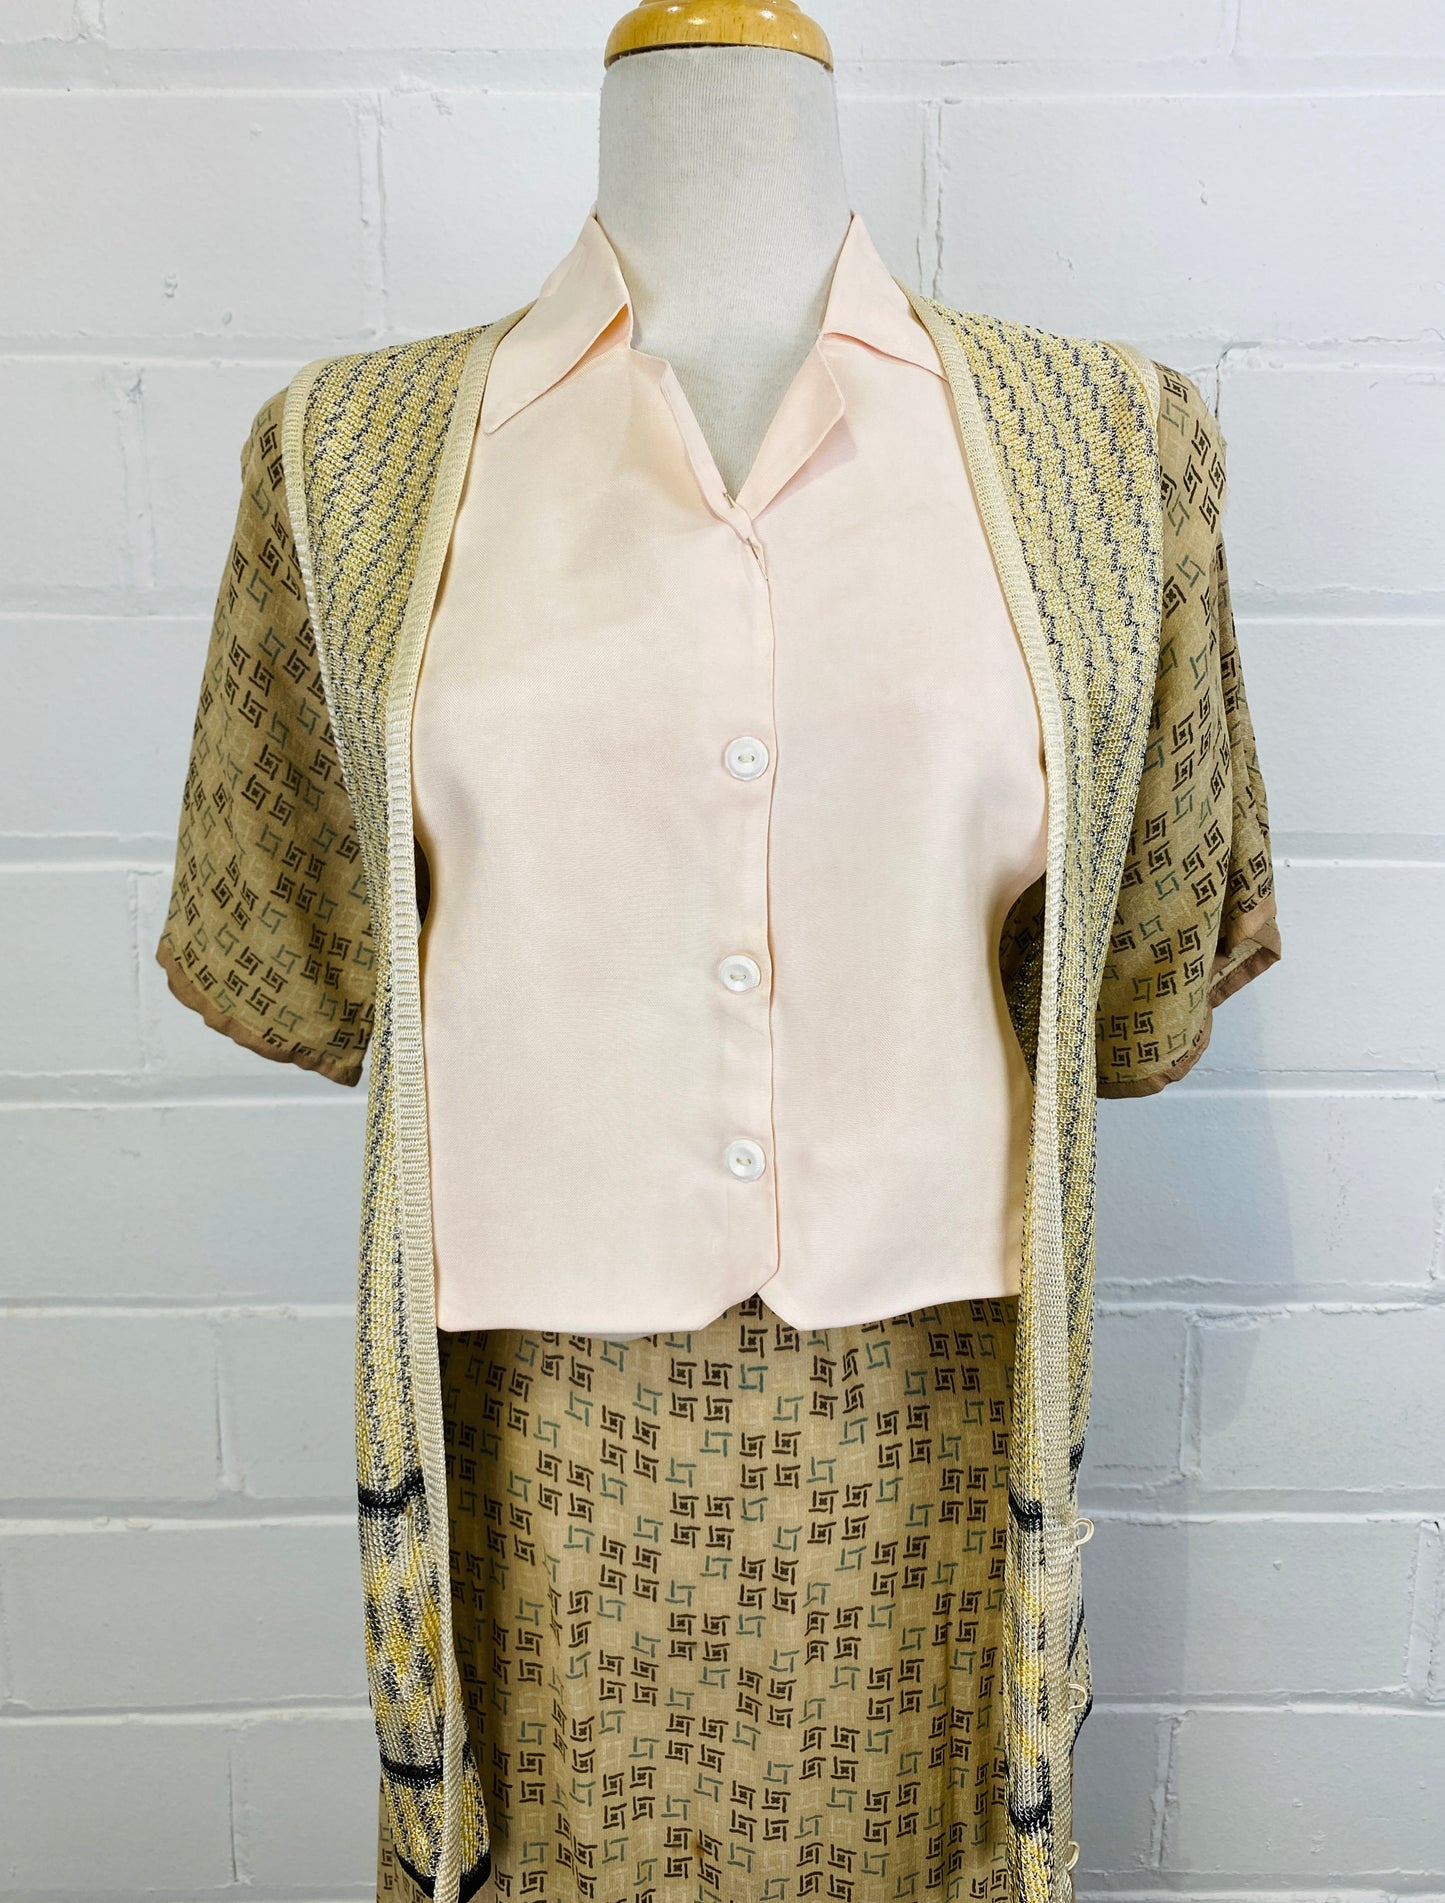 Vintage 1920s Pink Rayon Bib Collar with White Buttons